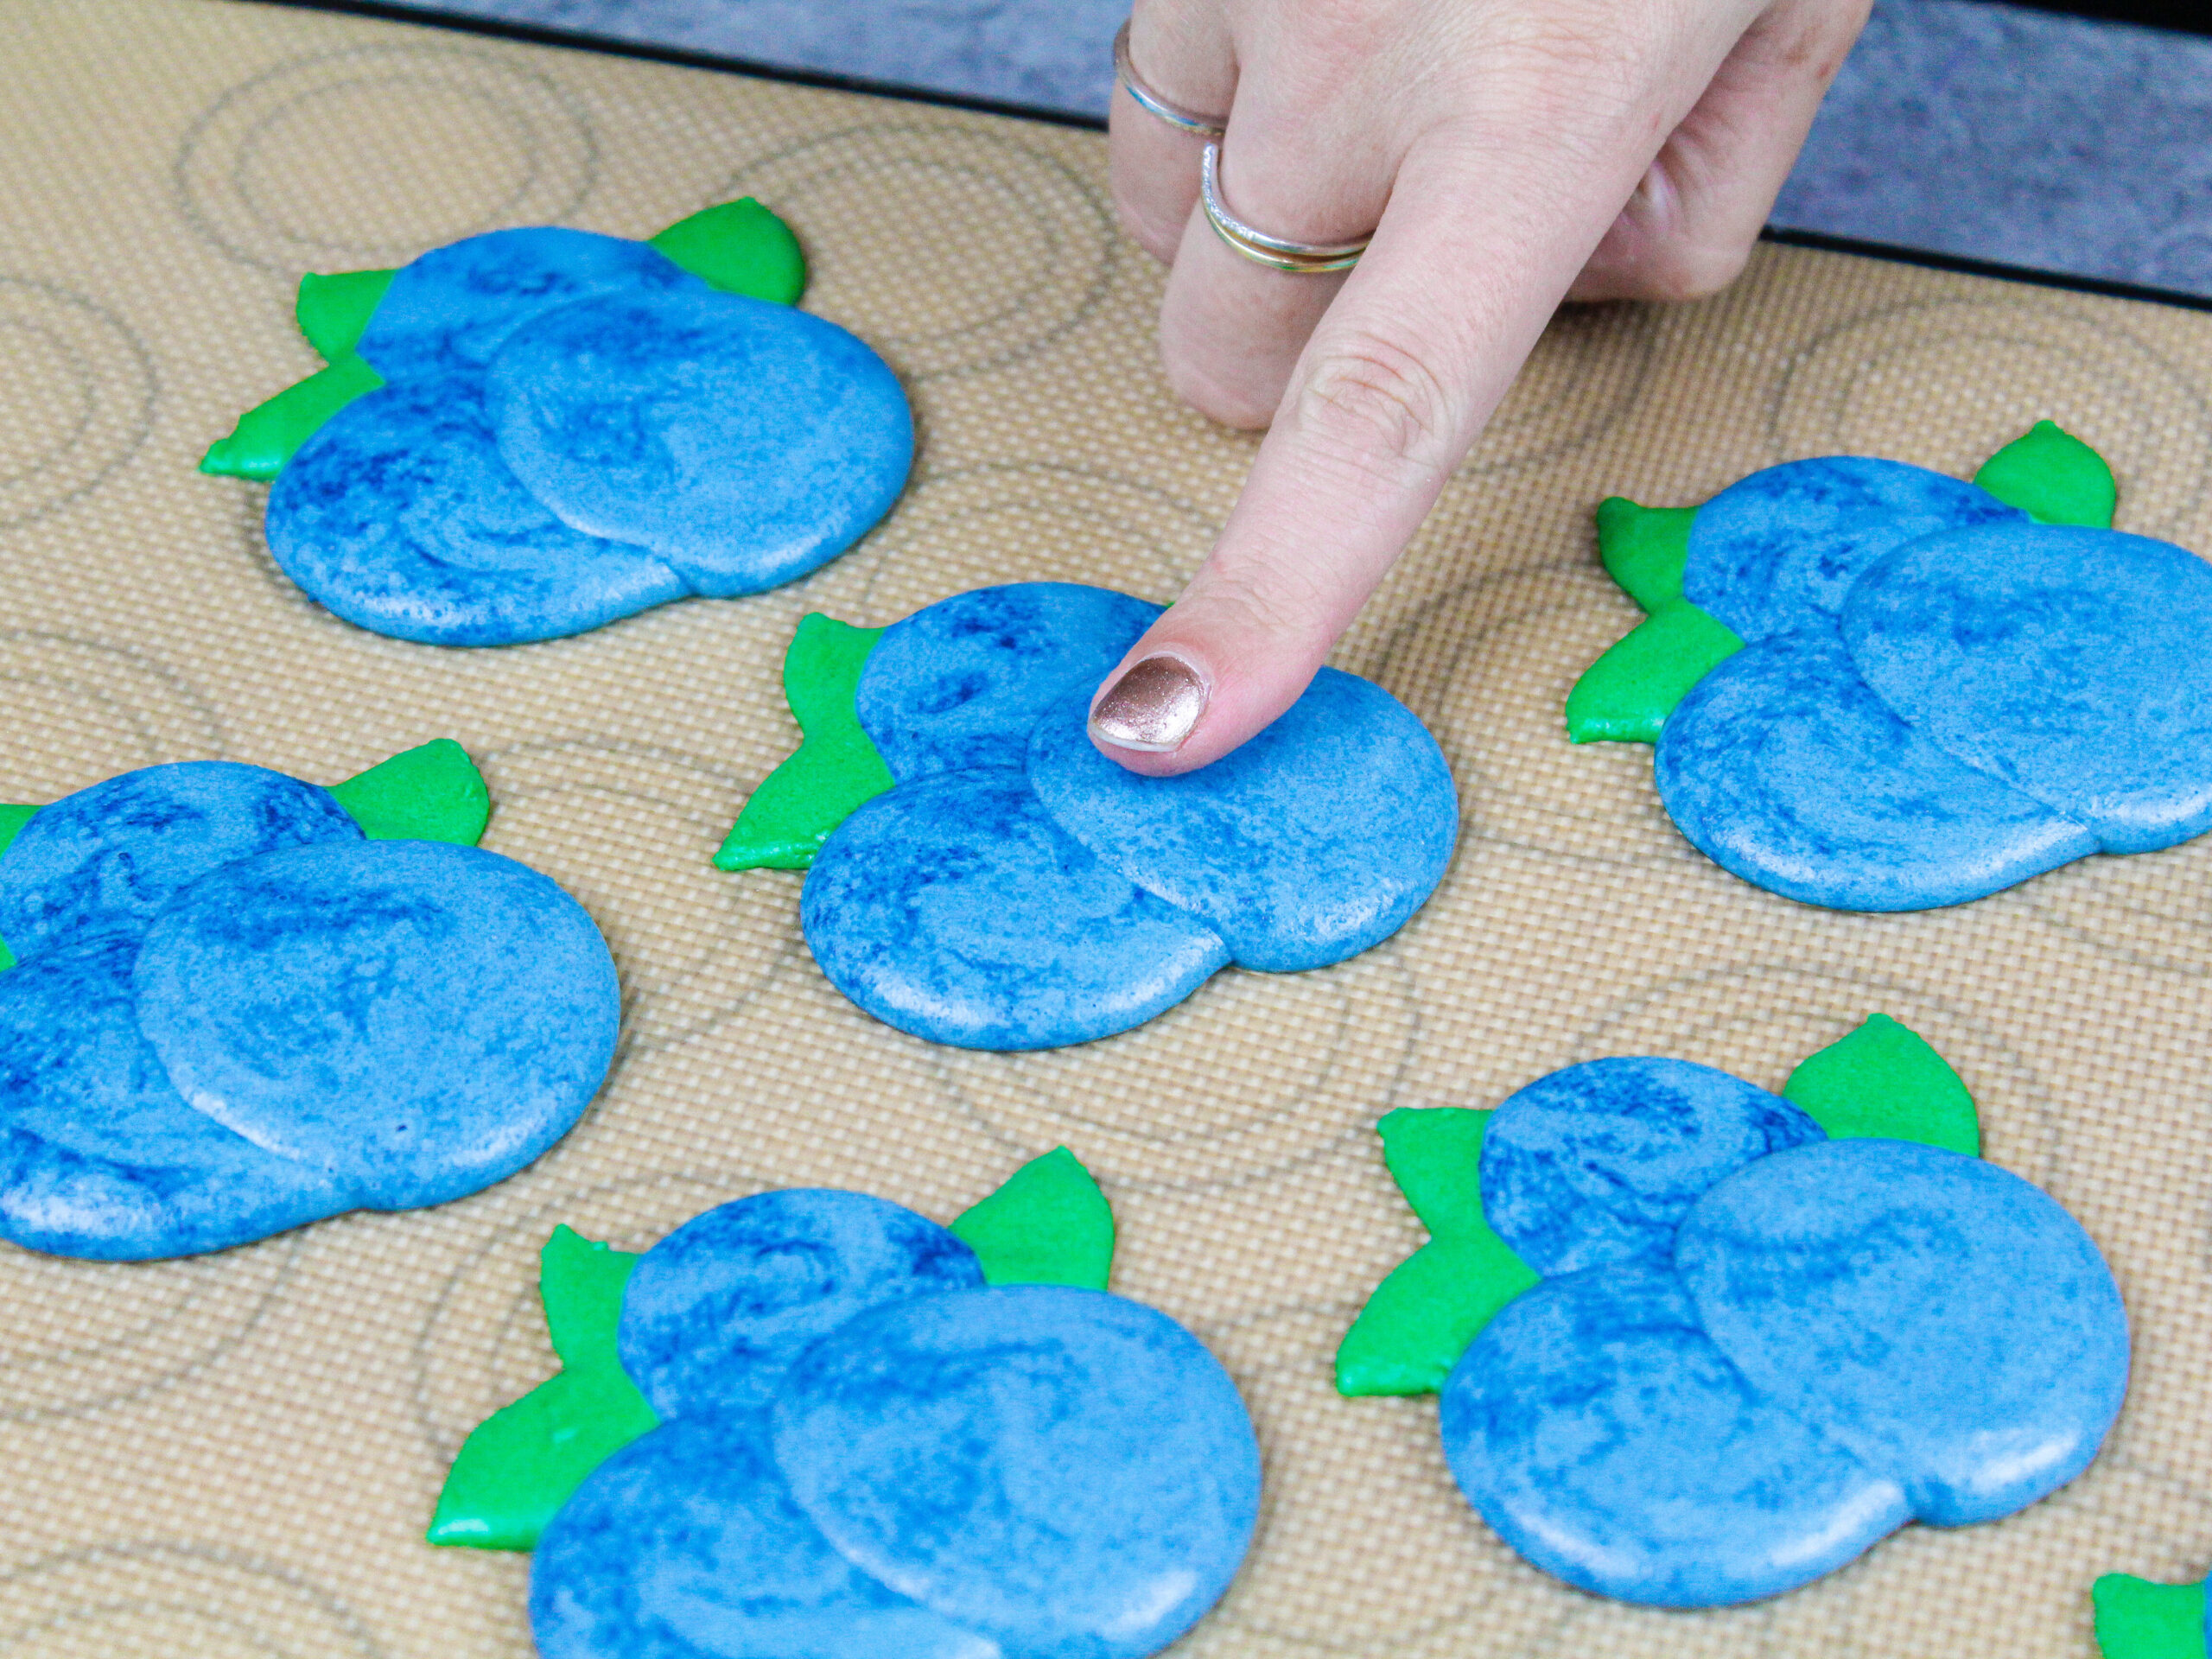 image of blueberry shaped macarons that have been piped and rested to form a skin before being baked